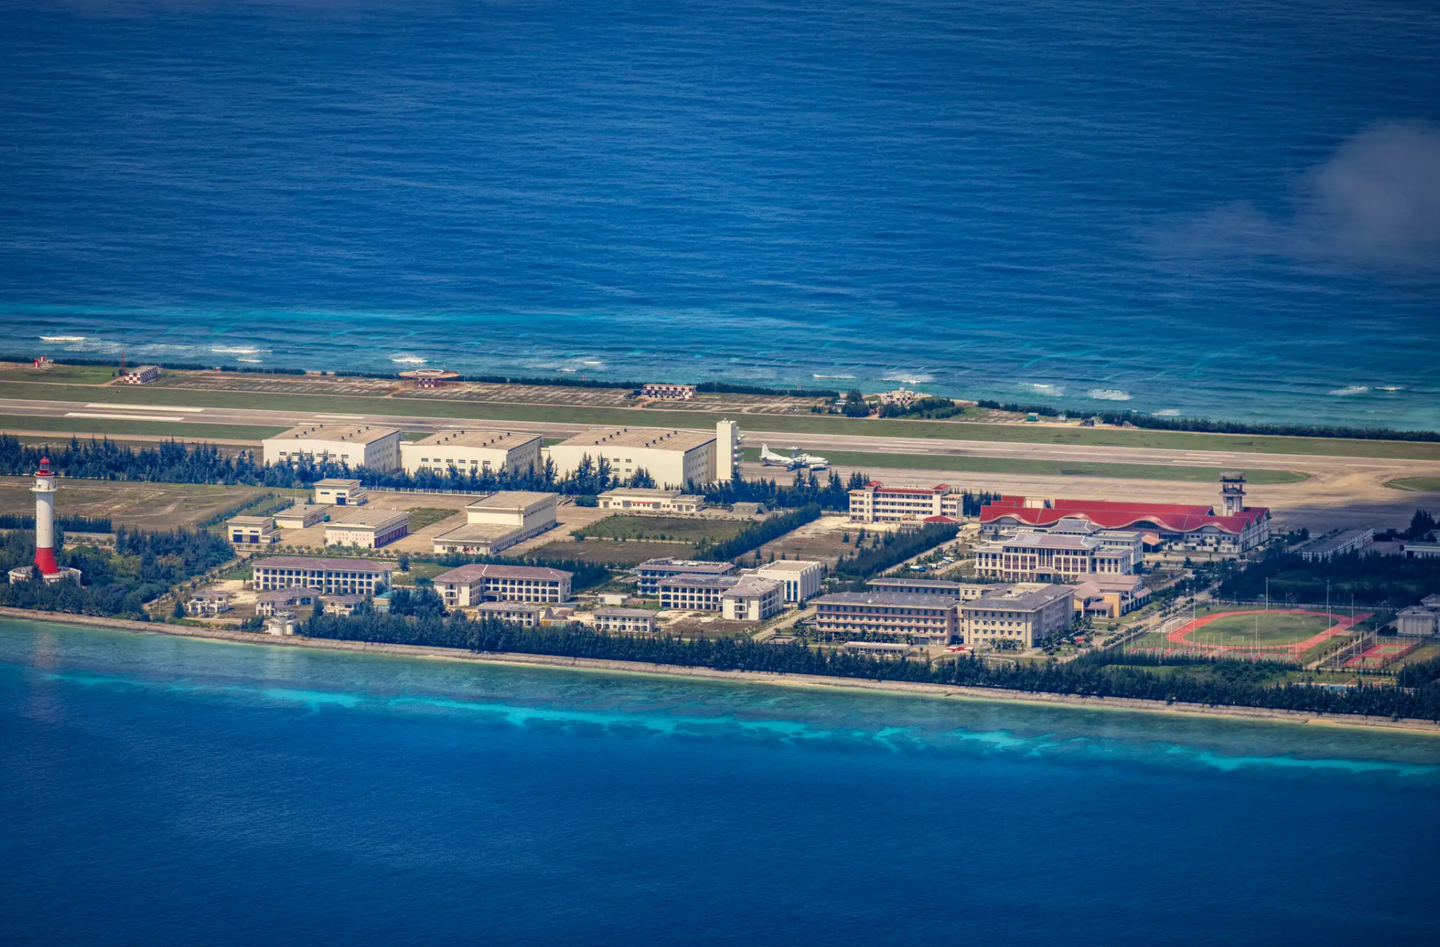 A Chinese&nbsp;KJ-500 airborne early warning and control&nbsp;(AEW&amp;C) aircraft on the airfield constructed on the island built out of Fiery Cross Reef in the South China Sea. <em>Ezra Acayan/Getty Images</em><br>